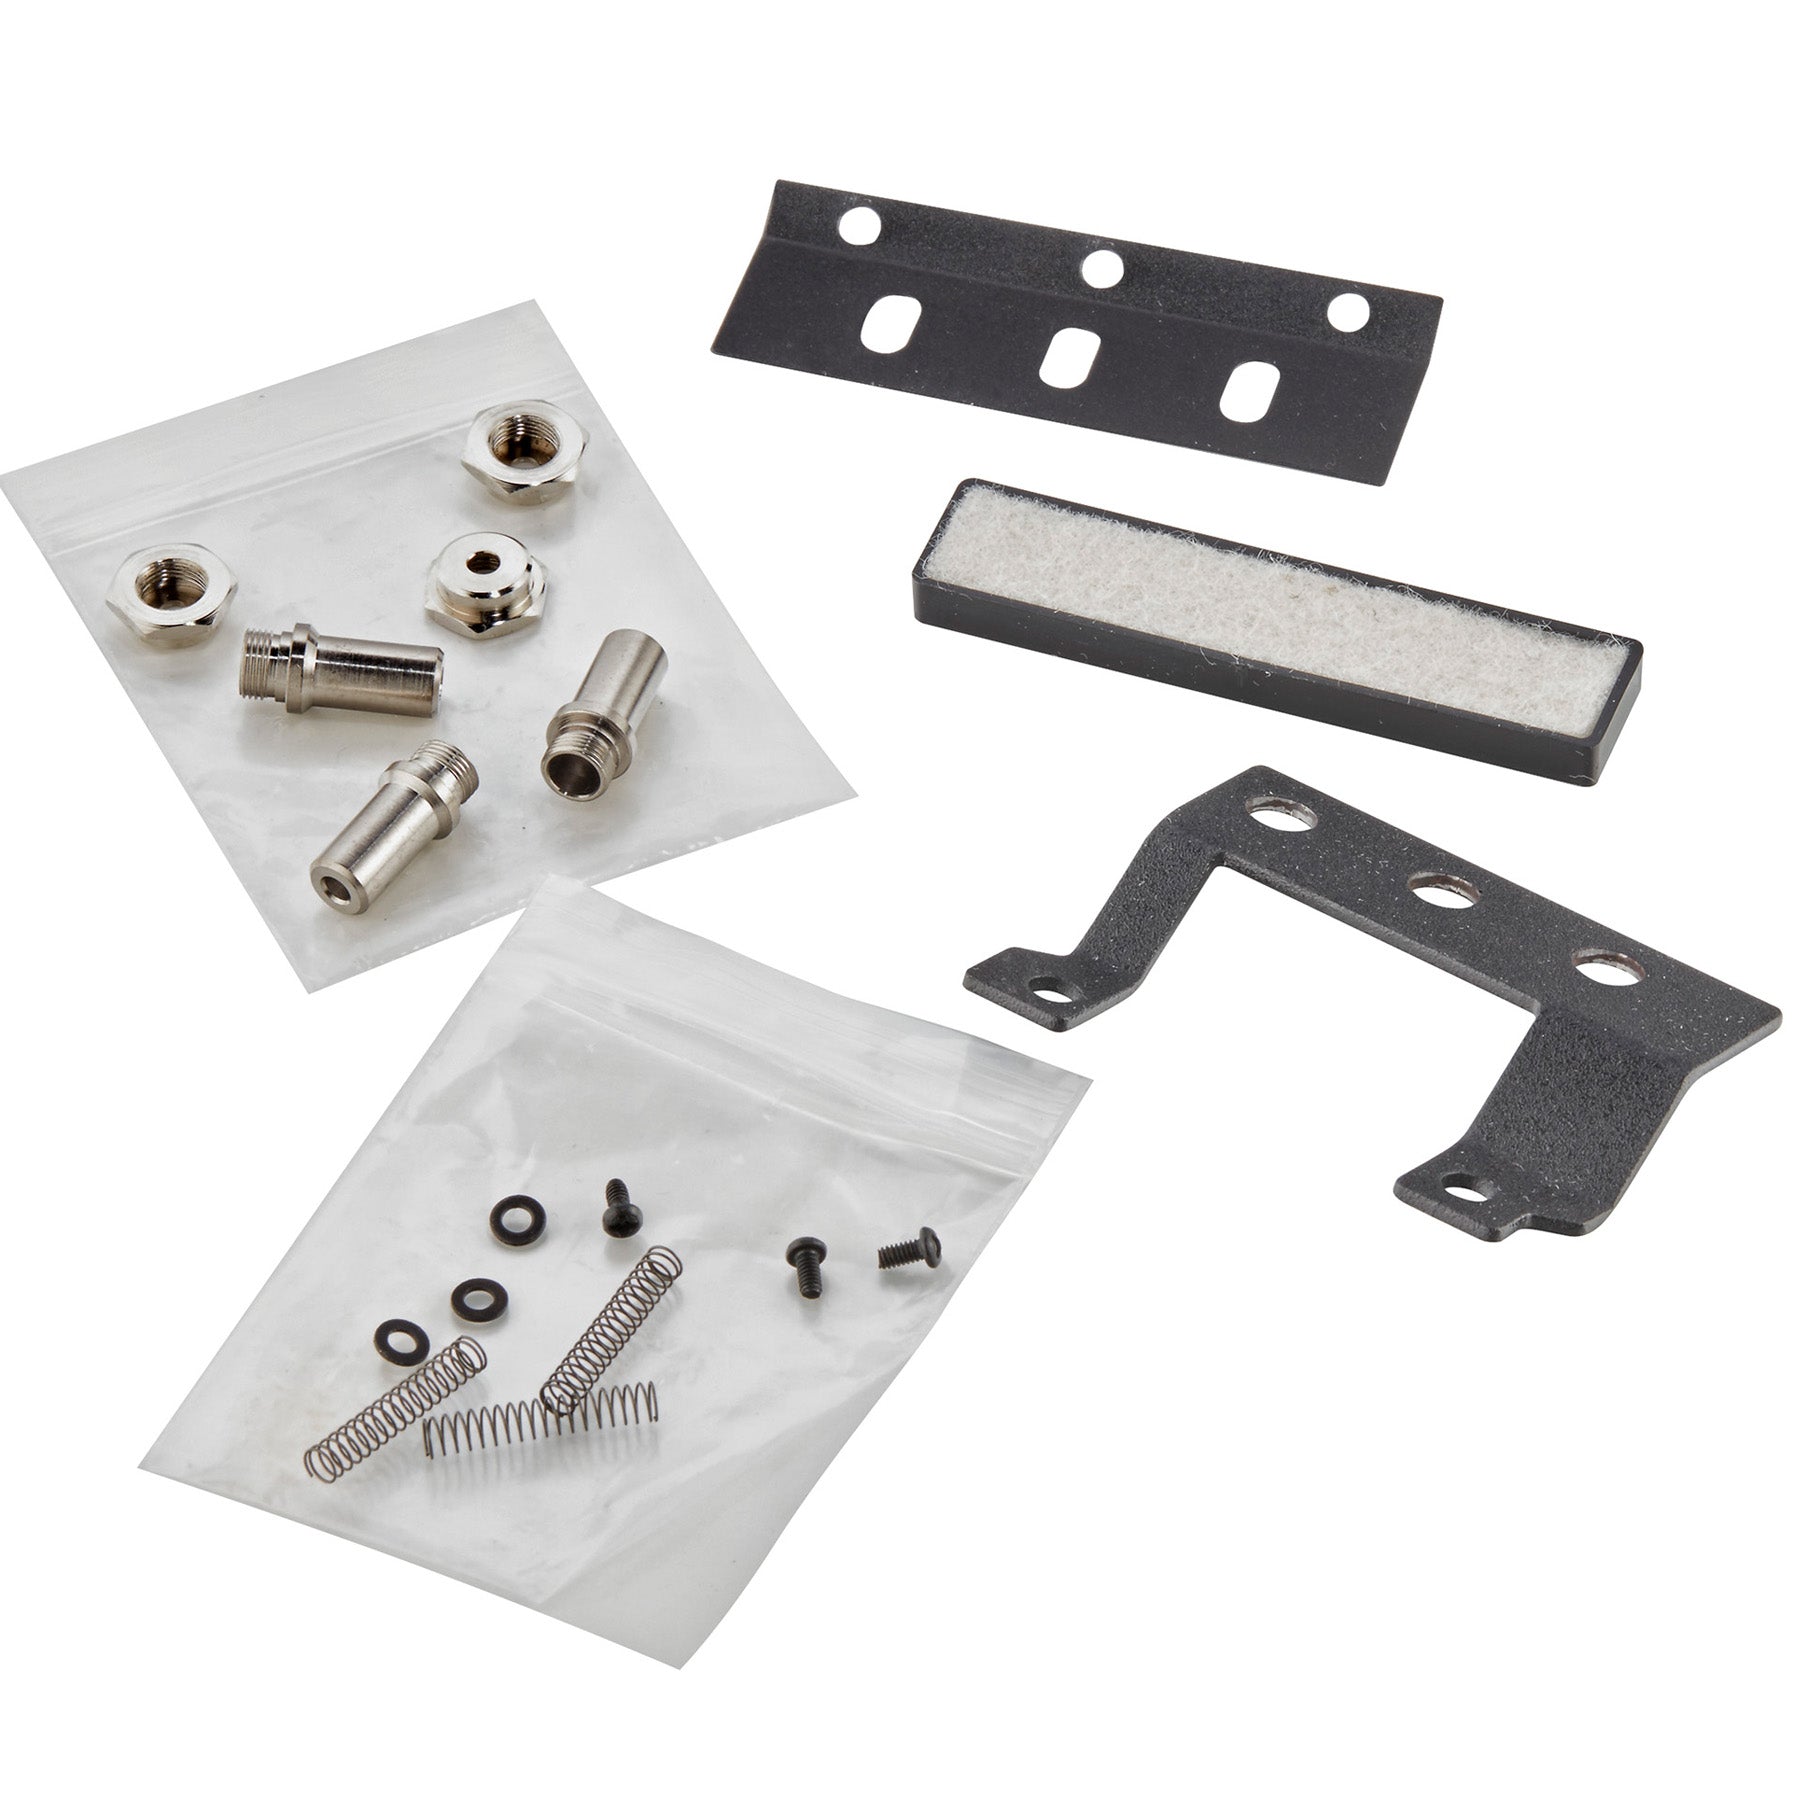 Lensometer Replacement Parts